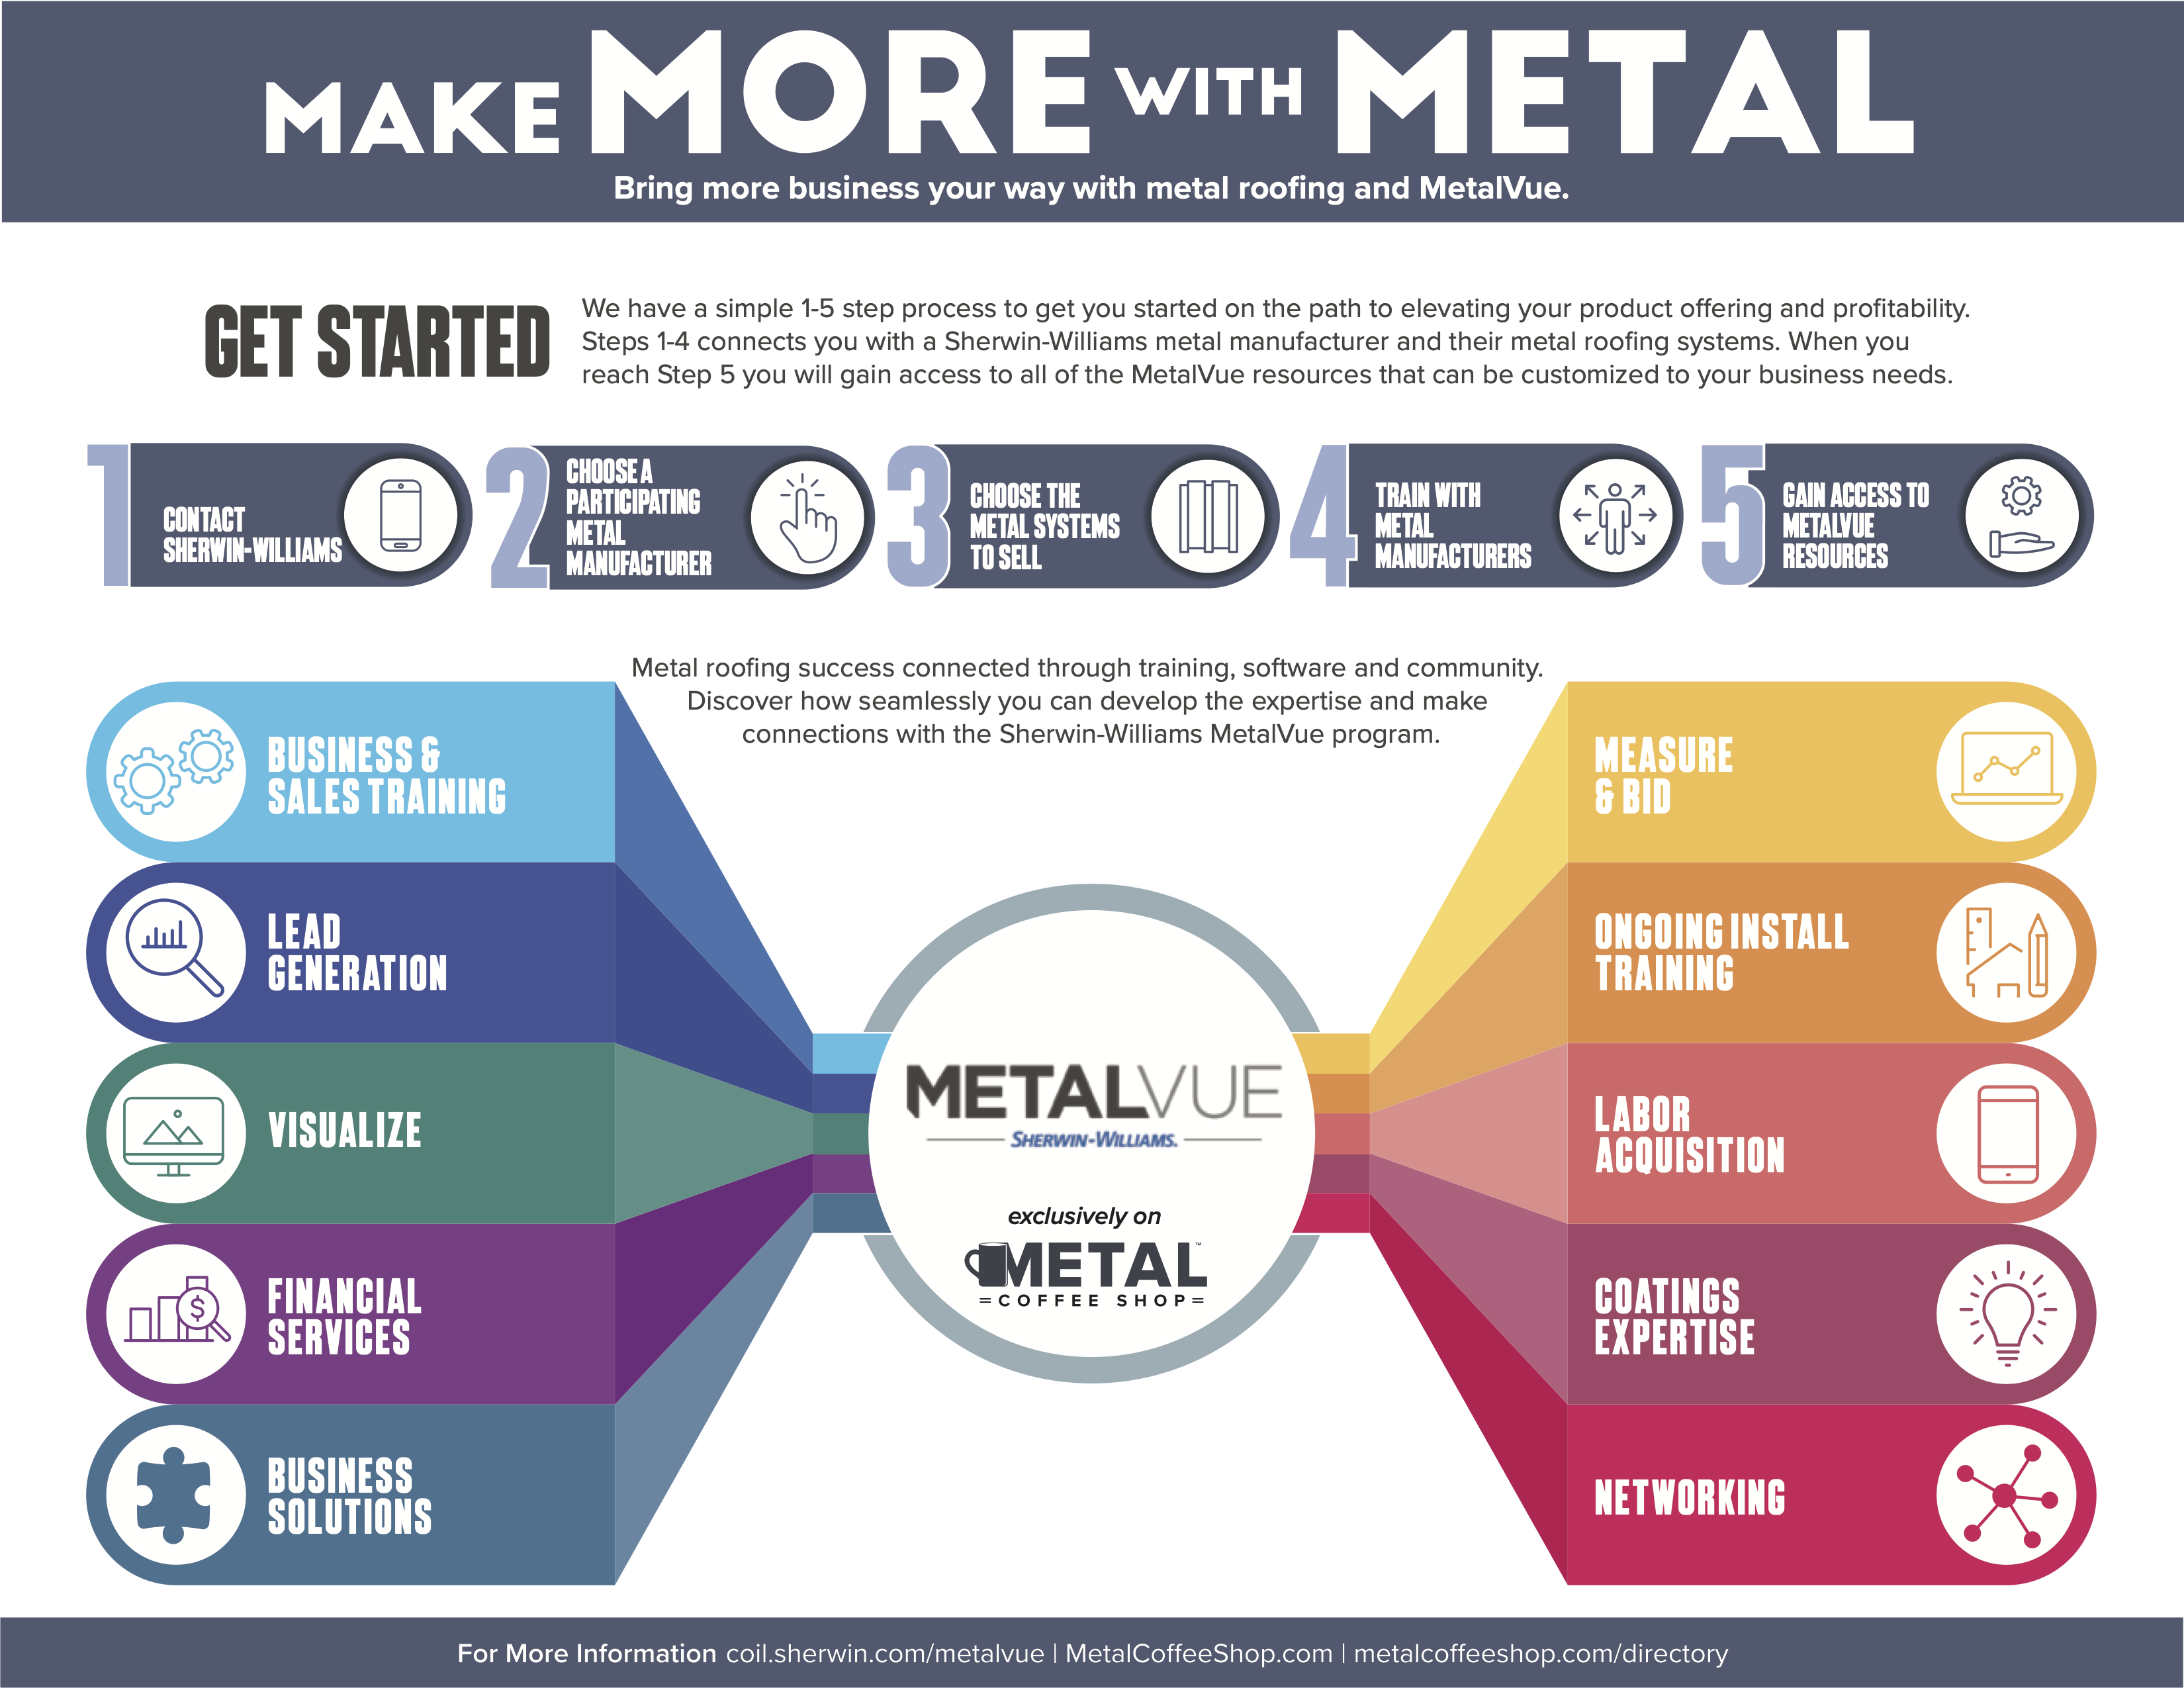 Make More with Metal - MetalVue Infographic